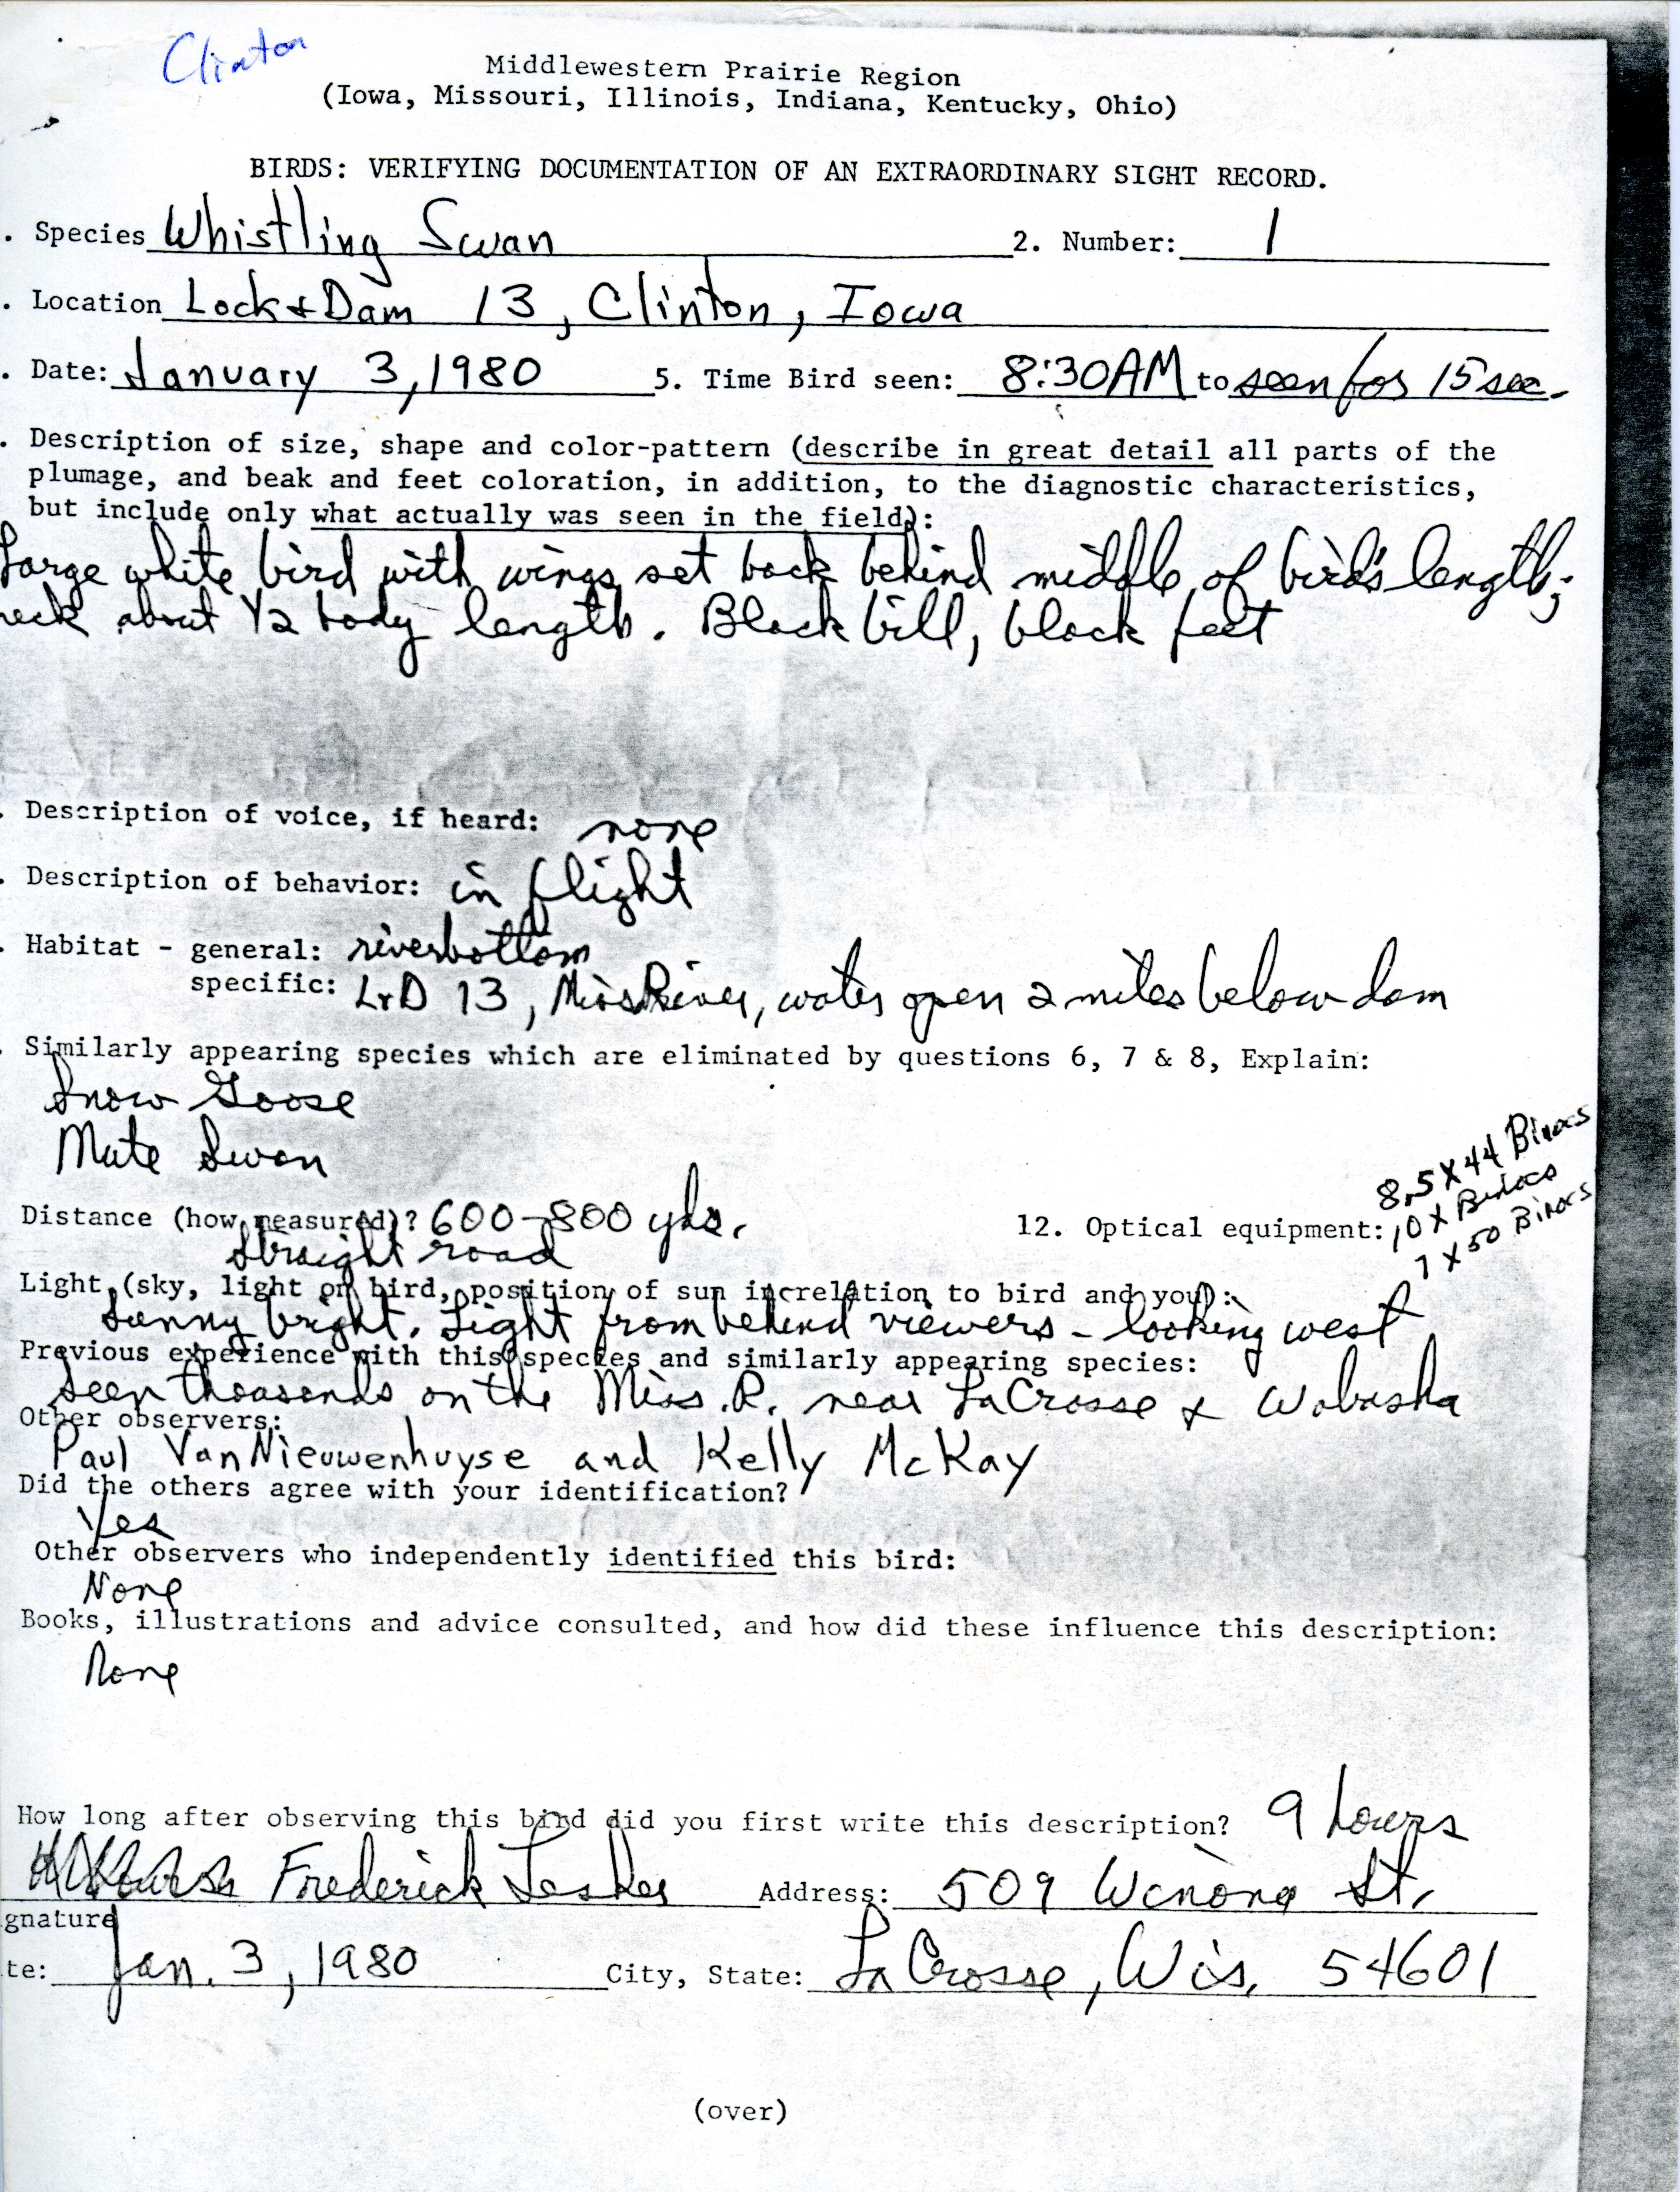 Verifying documentation form for Whistling Swan sighting submitted by Frederick Lesher, January 3 1981